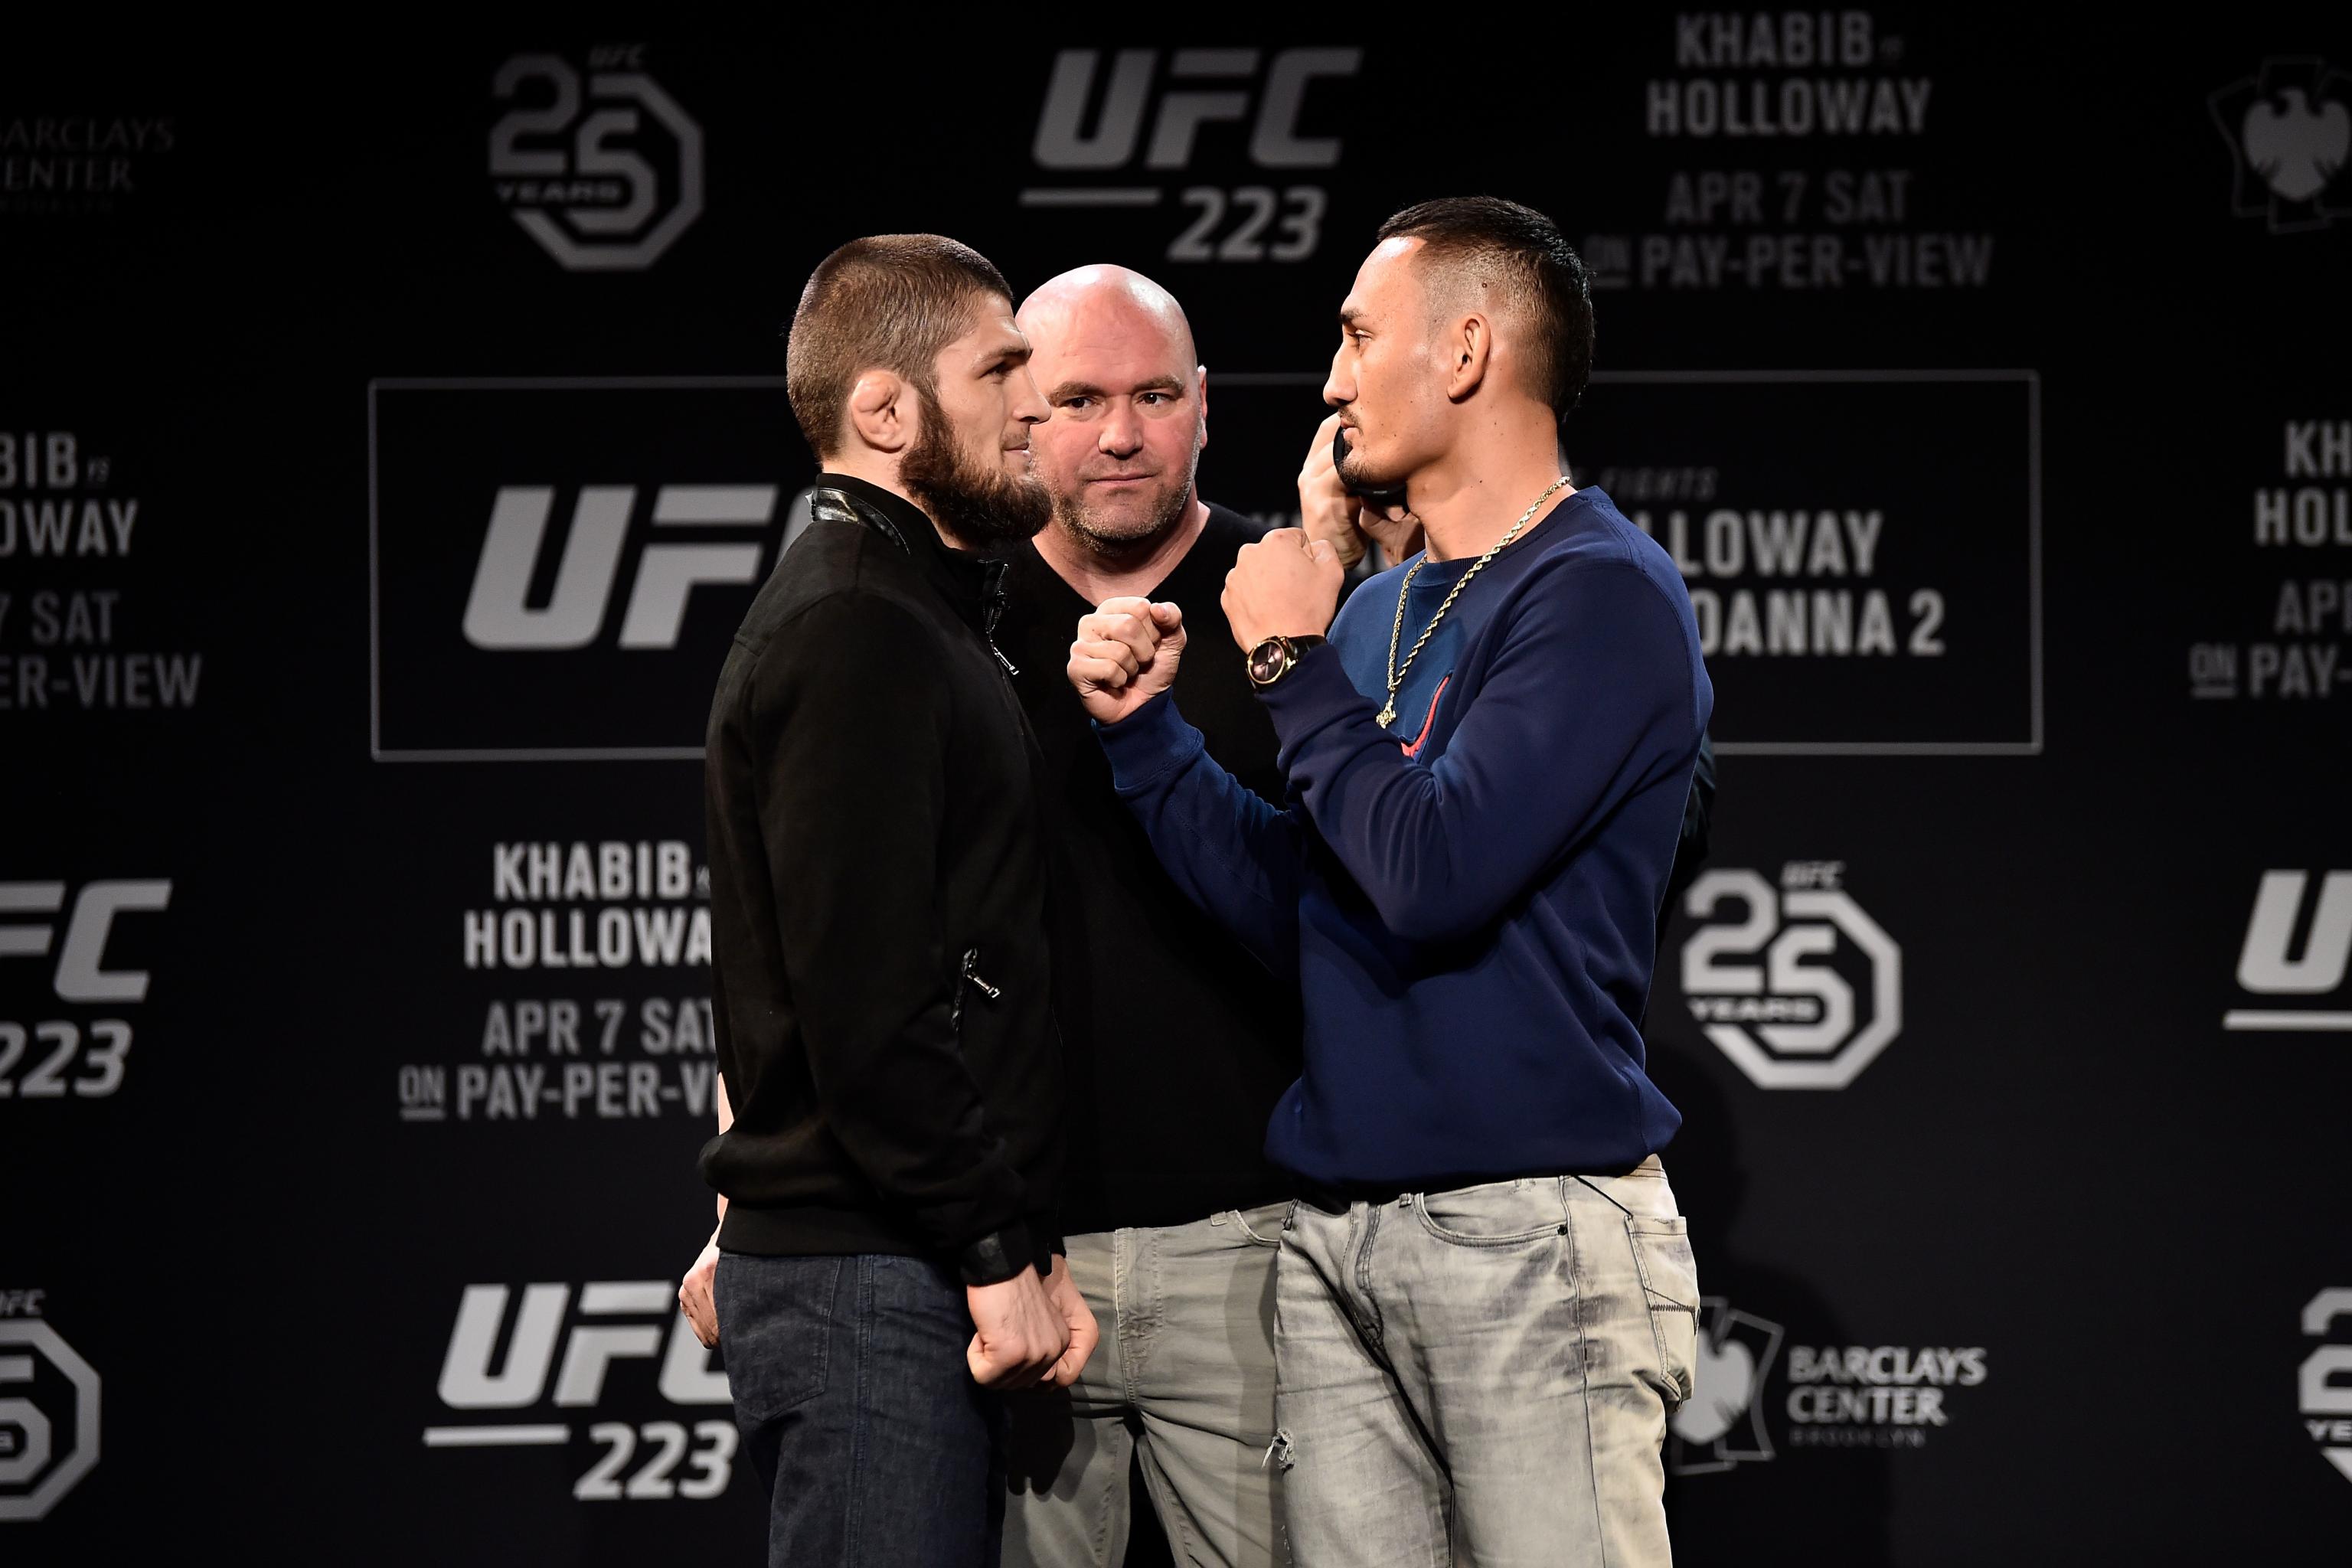 UFC 223: Khabib vs. Holloway Odds, Tickets, Predictions and Pre-Weigh-in Hype | Bleacher Report | Latest News, Videos and Highlights